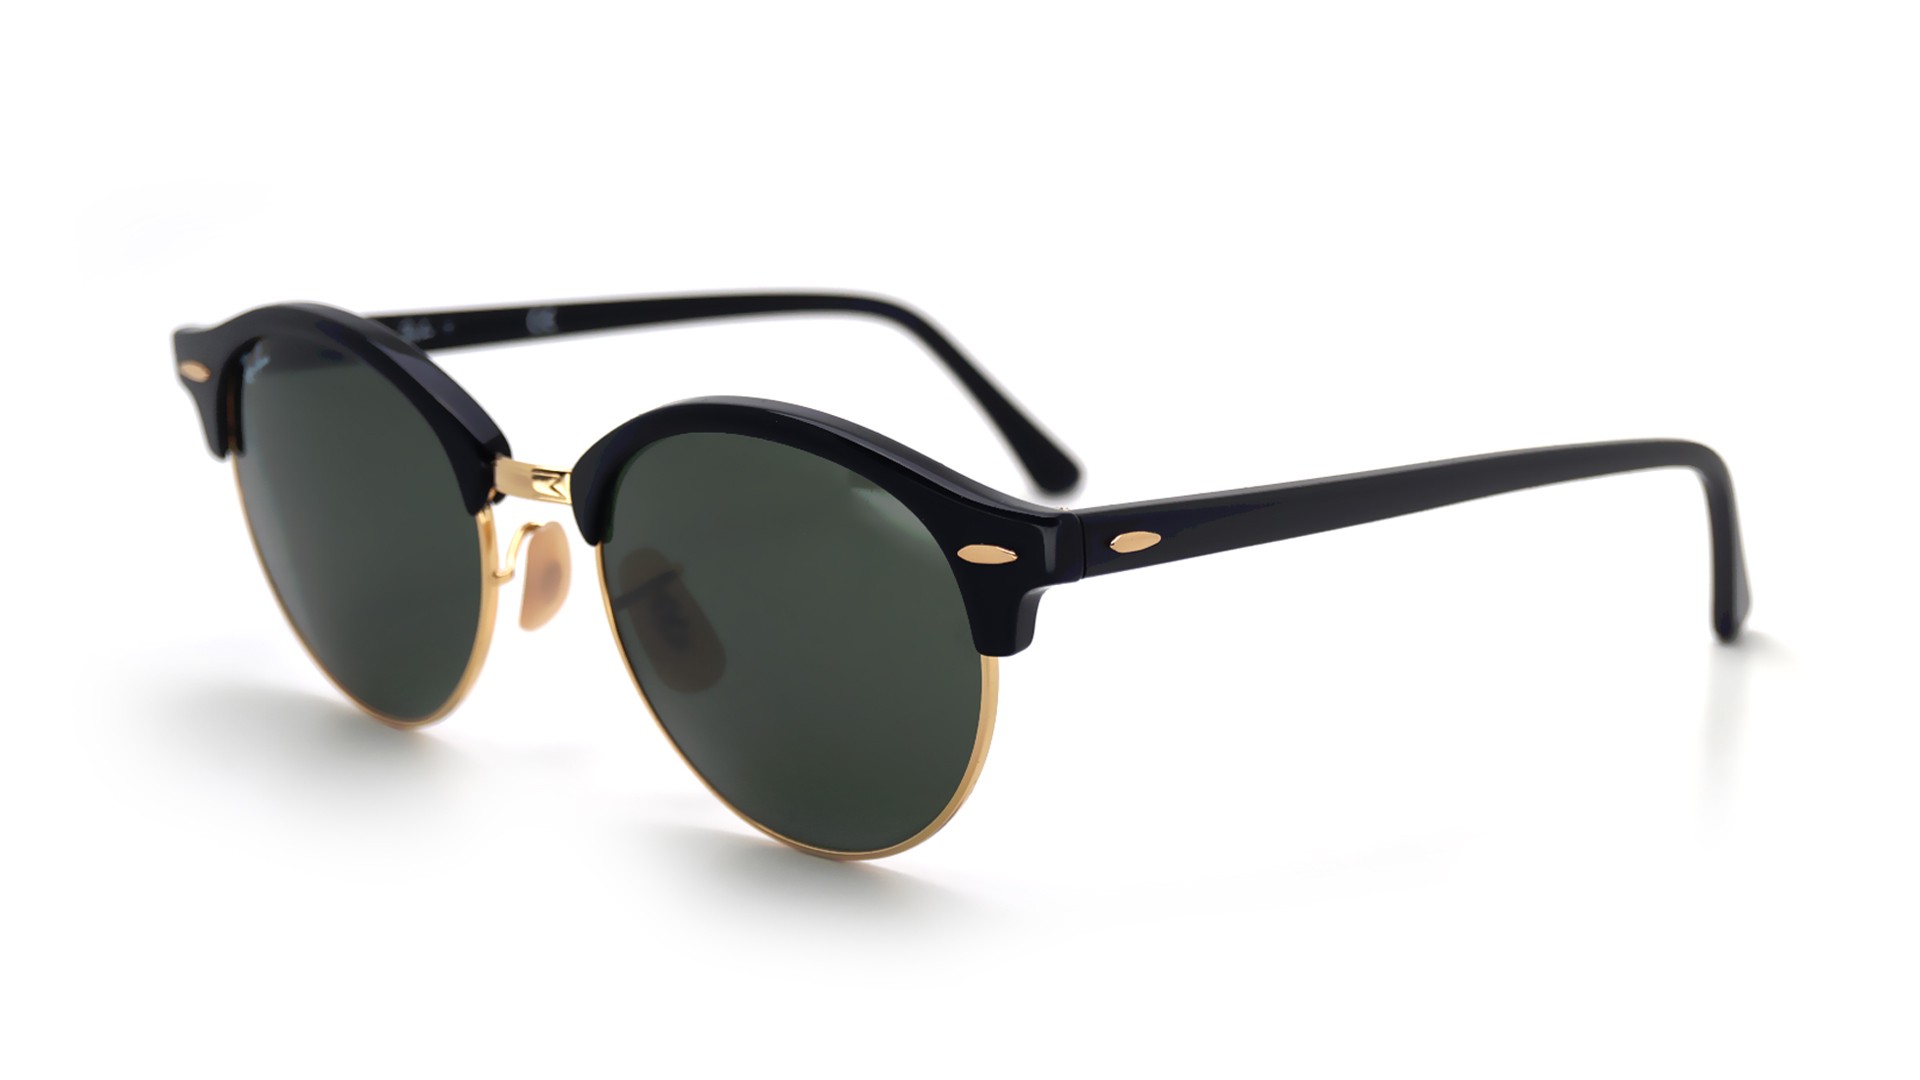 Ray-Ban Clubround Black RB4246 901 51 